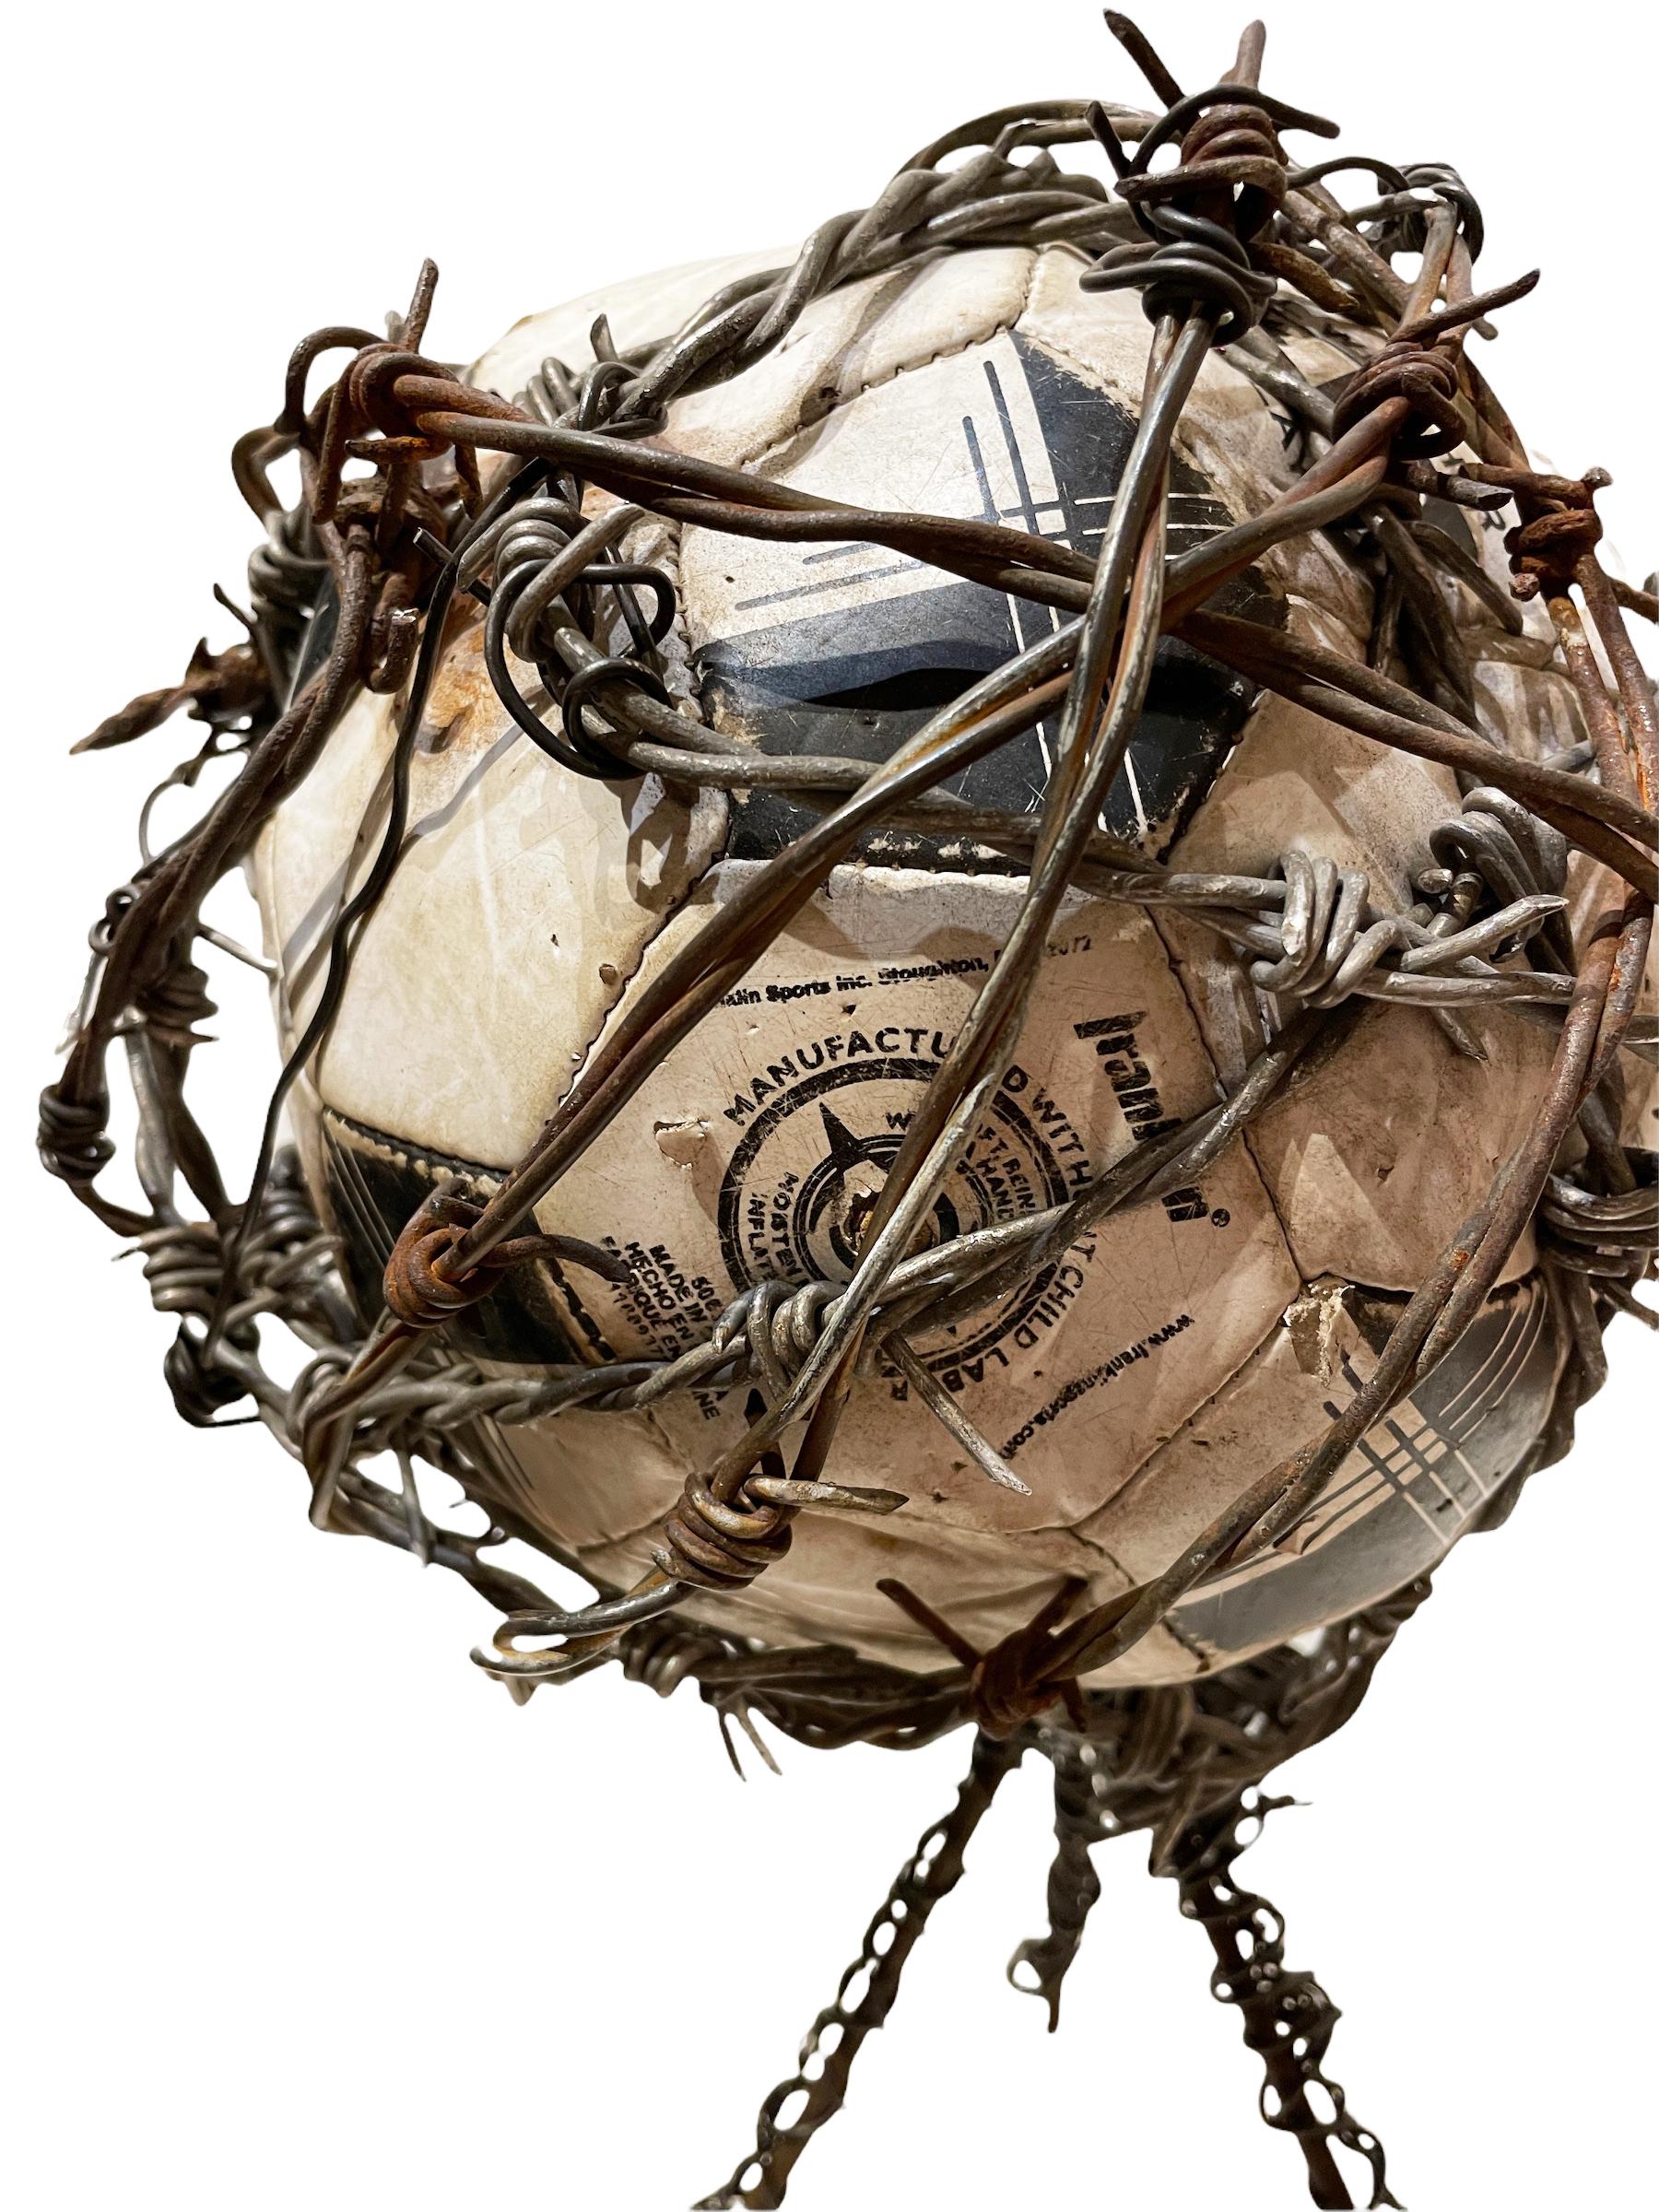 FIFA  - Found Object Sculpture with Deflated Soccer Ball and Barbed Wire - Contemporary Mixed Media Art by Rick Farrell